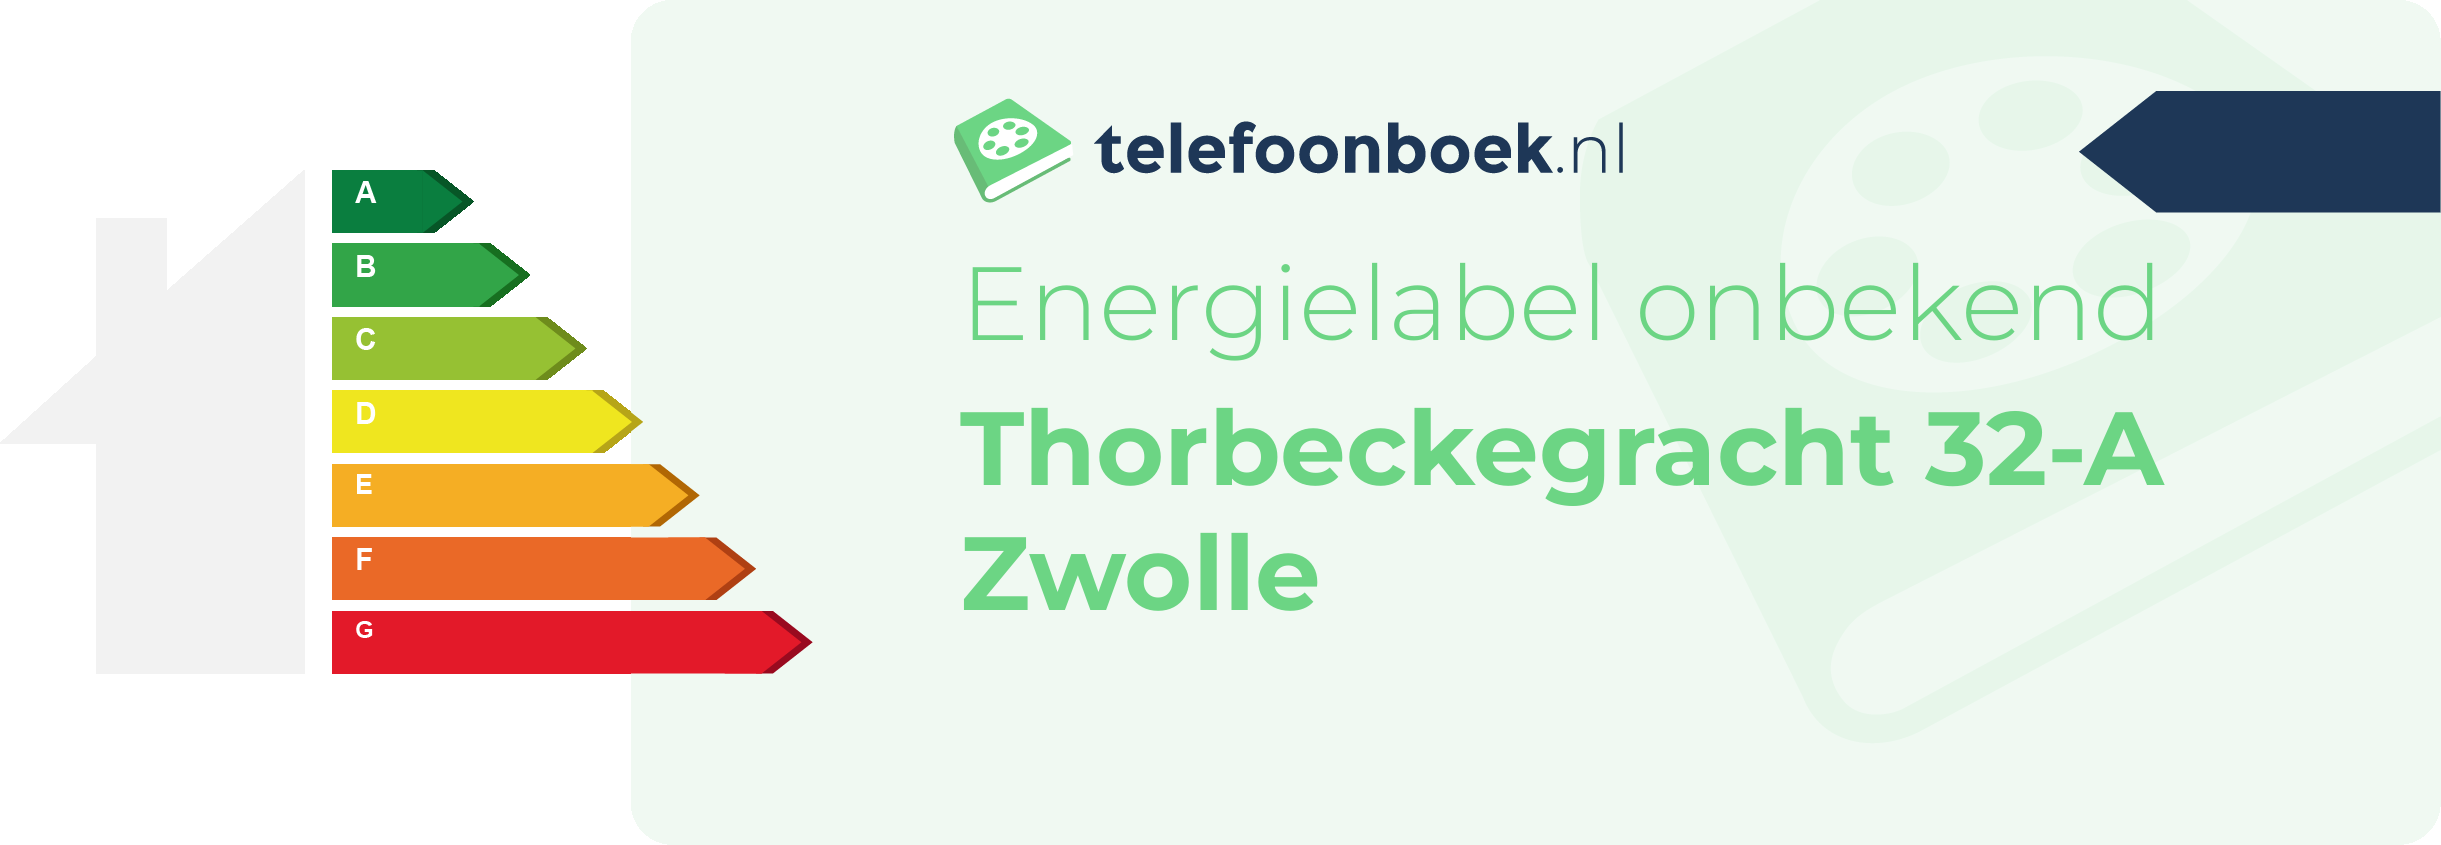 Energielabel Thorbeckegracht 32-A Zwolle